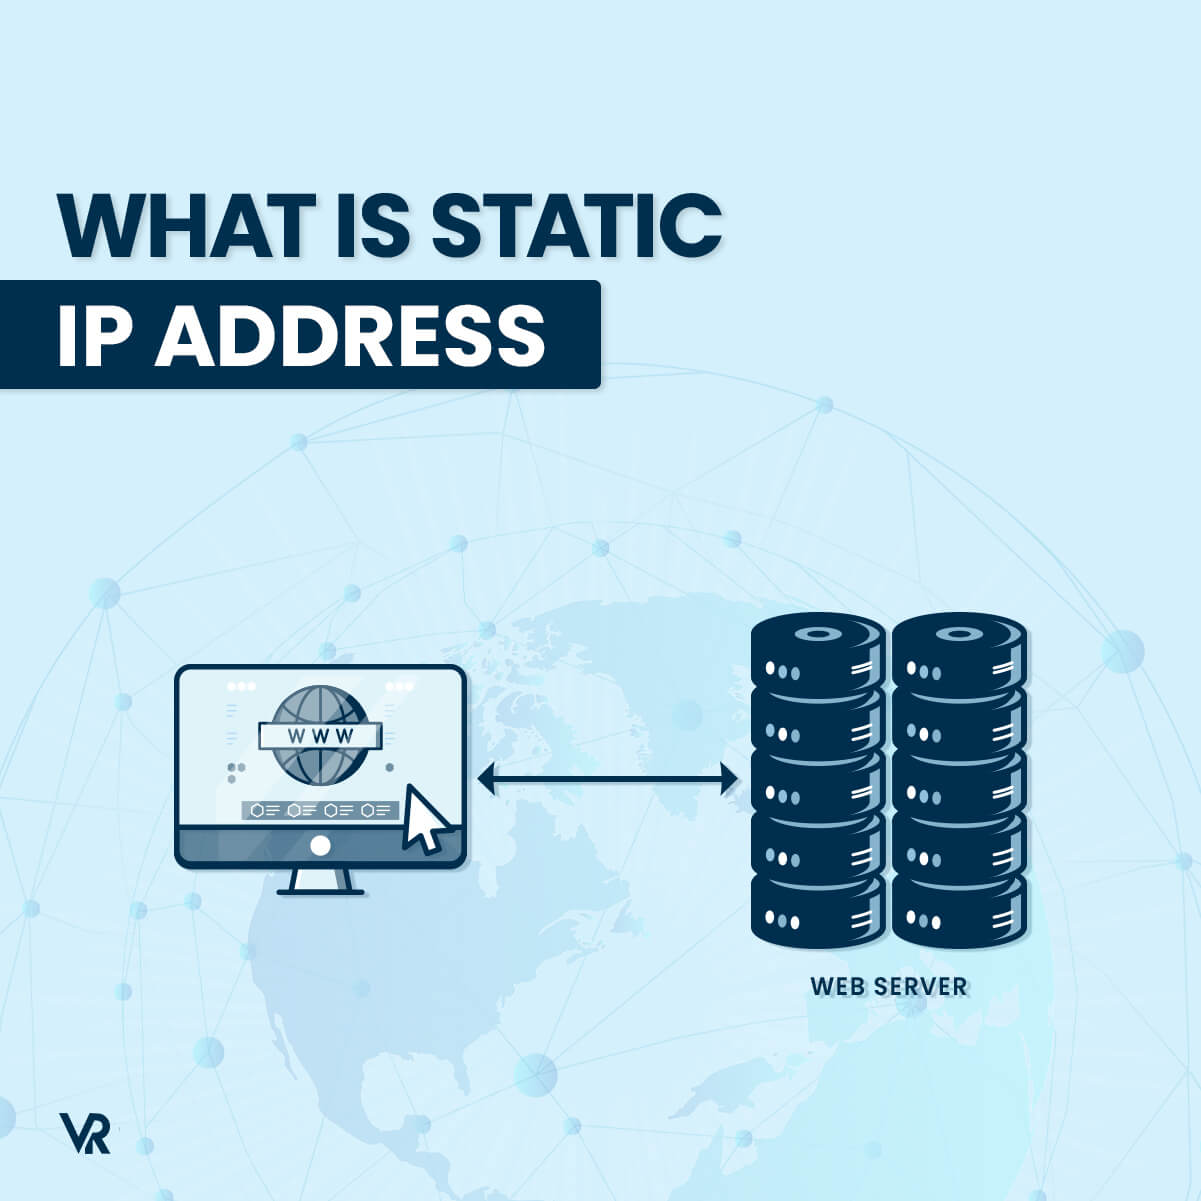 Static-ip-address-Featured